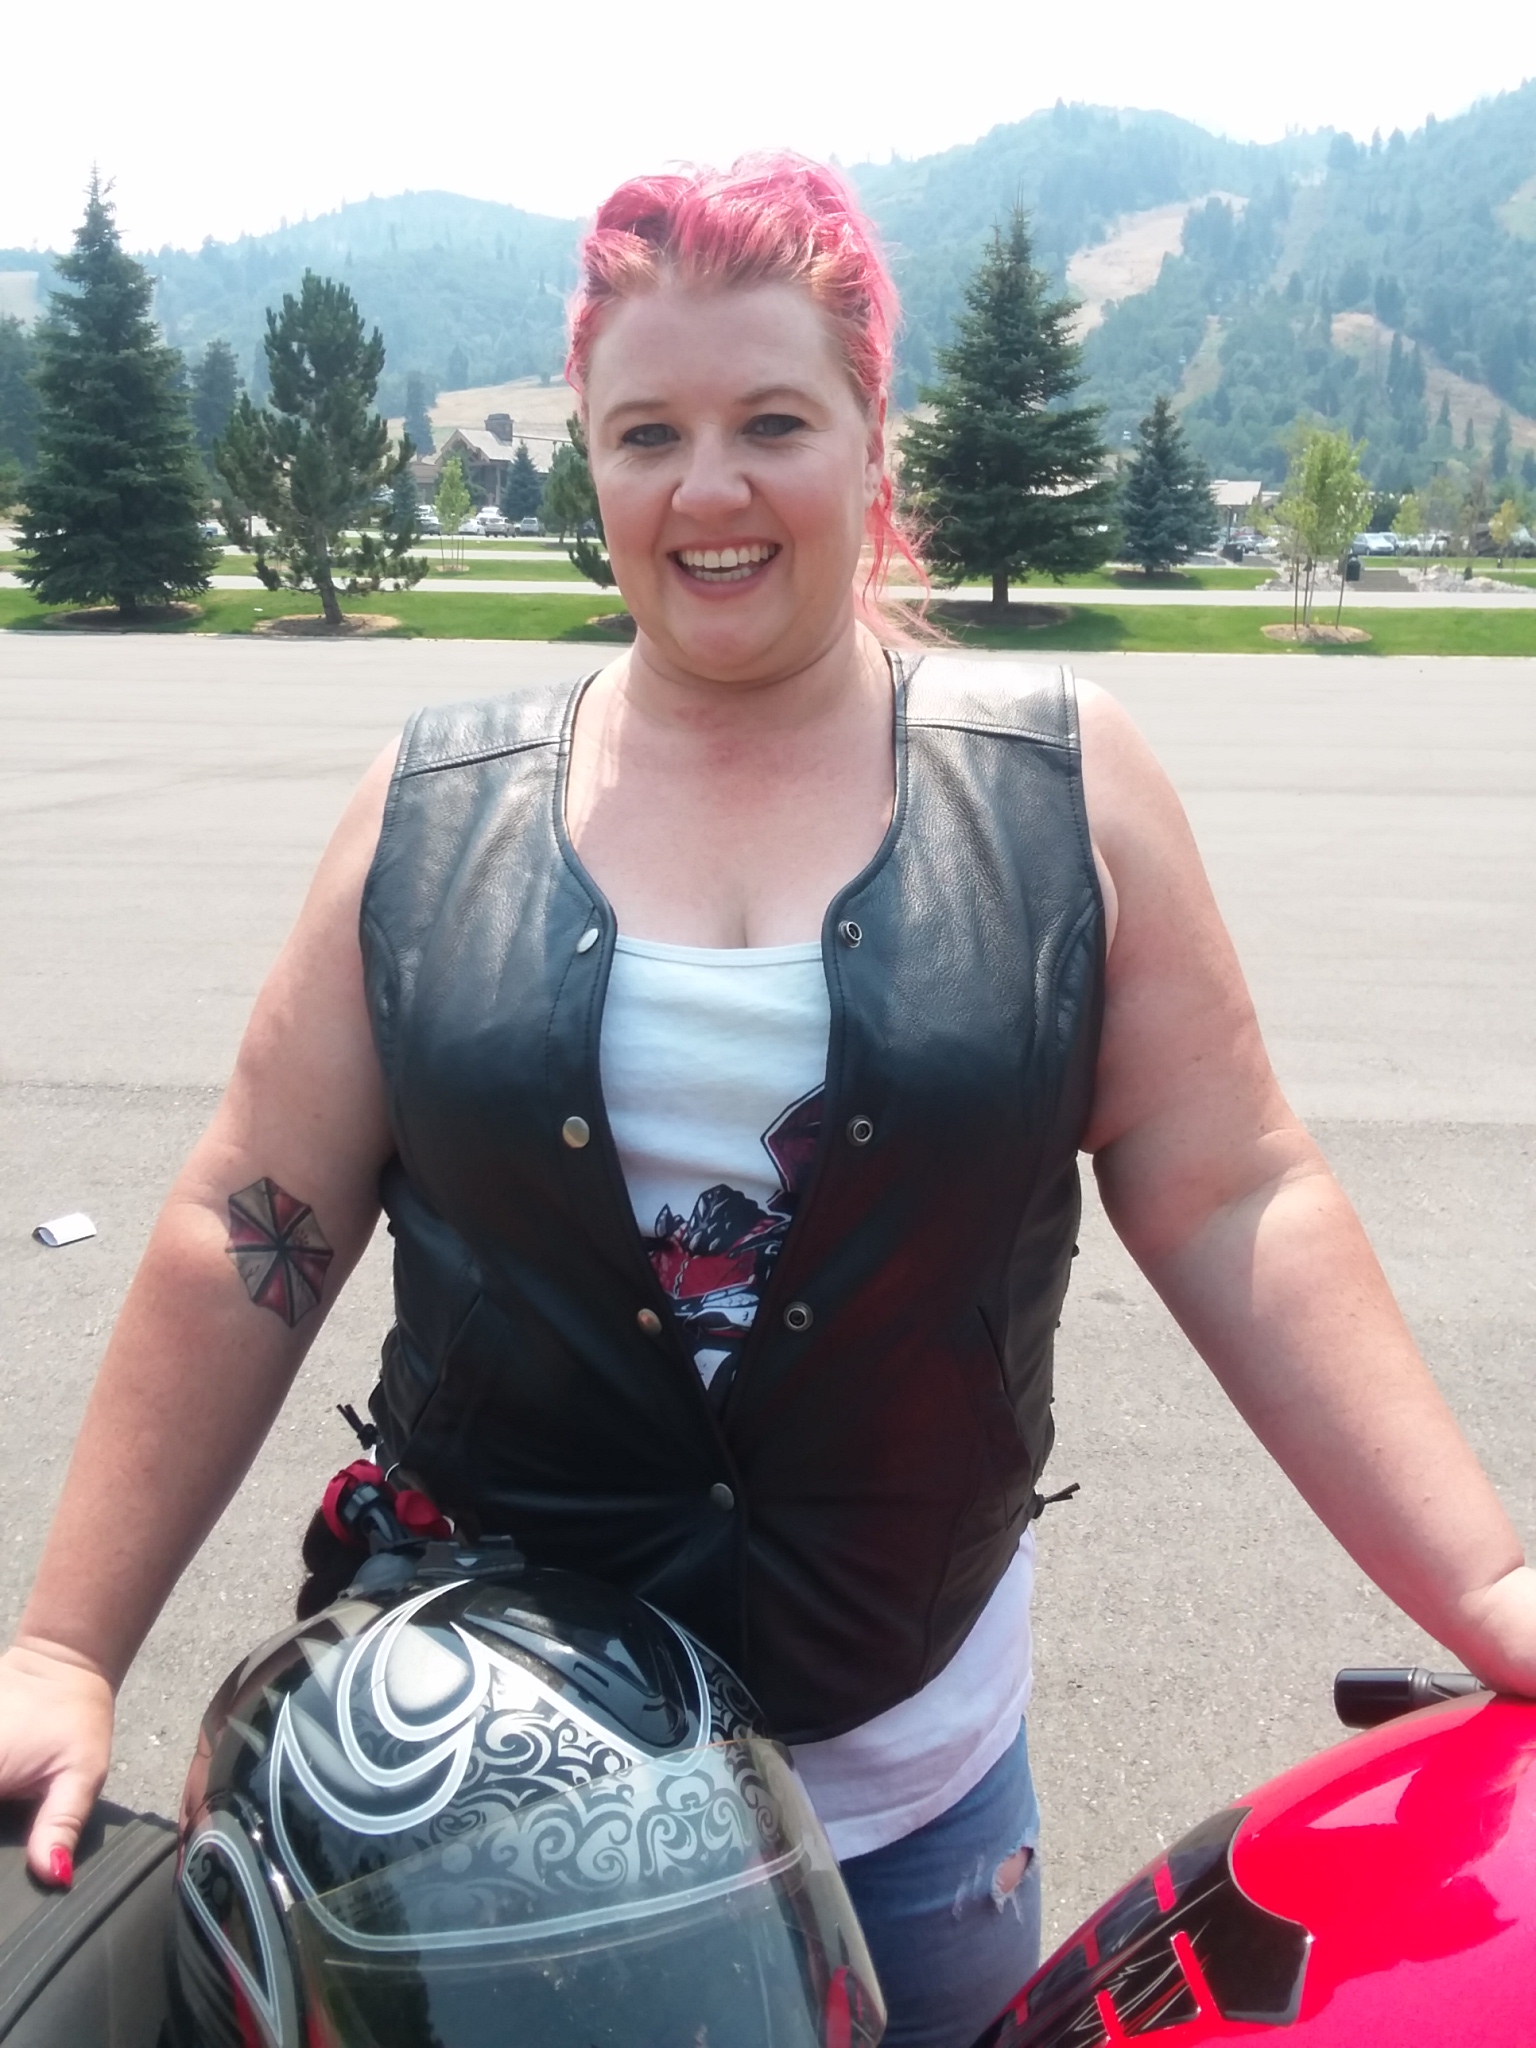 A woman with striking red hair stands next to a Kawasaki Ninja 650. She wears a black leather vest with snaps, undone to her naval, and a white tank top beneath it. An Umbrella Corp logo tattoo is visible in the crook of her right arm. She smiles with good humor. In the background is an expansive parking lot with evergreen trees, and further away, groomed ski slopes rise to the horizon.